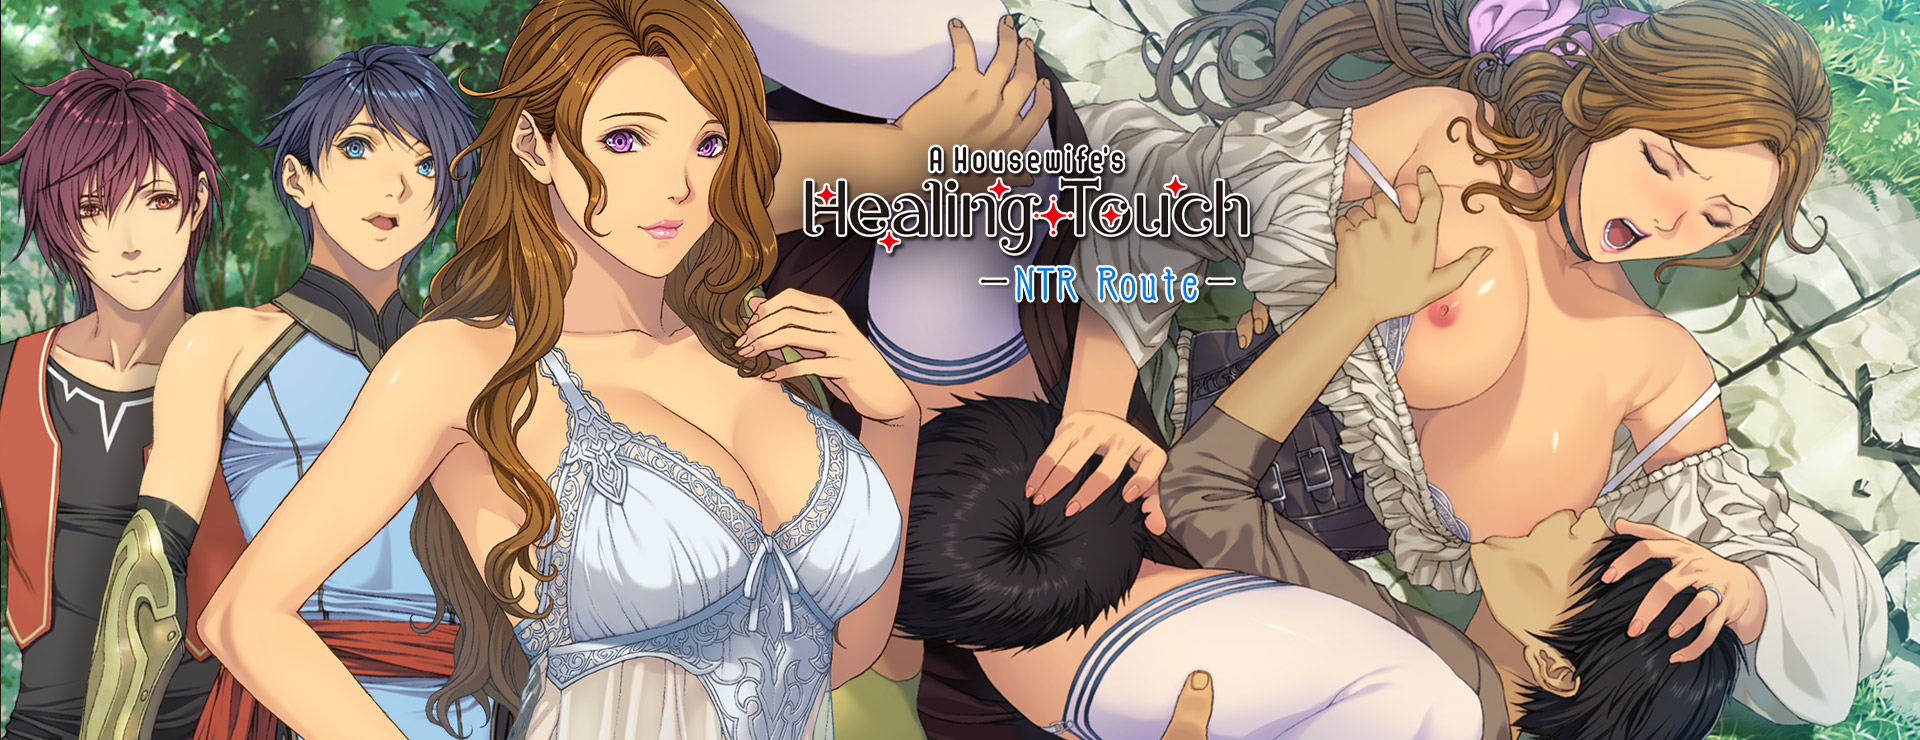 A Housewife's Healing Touch (NTR Route) - Action Adventure Game